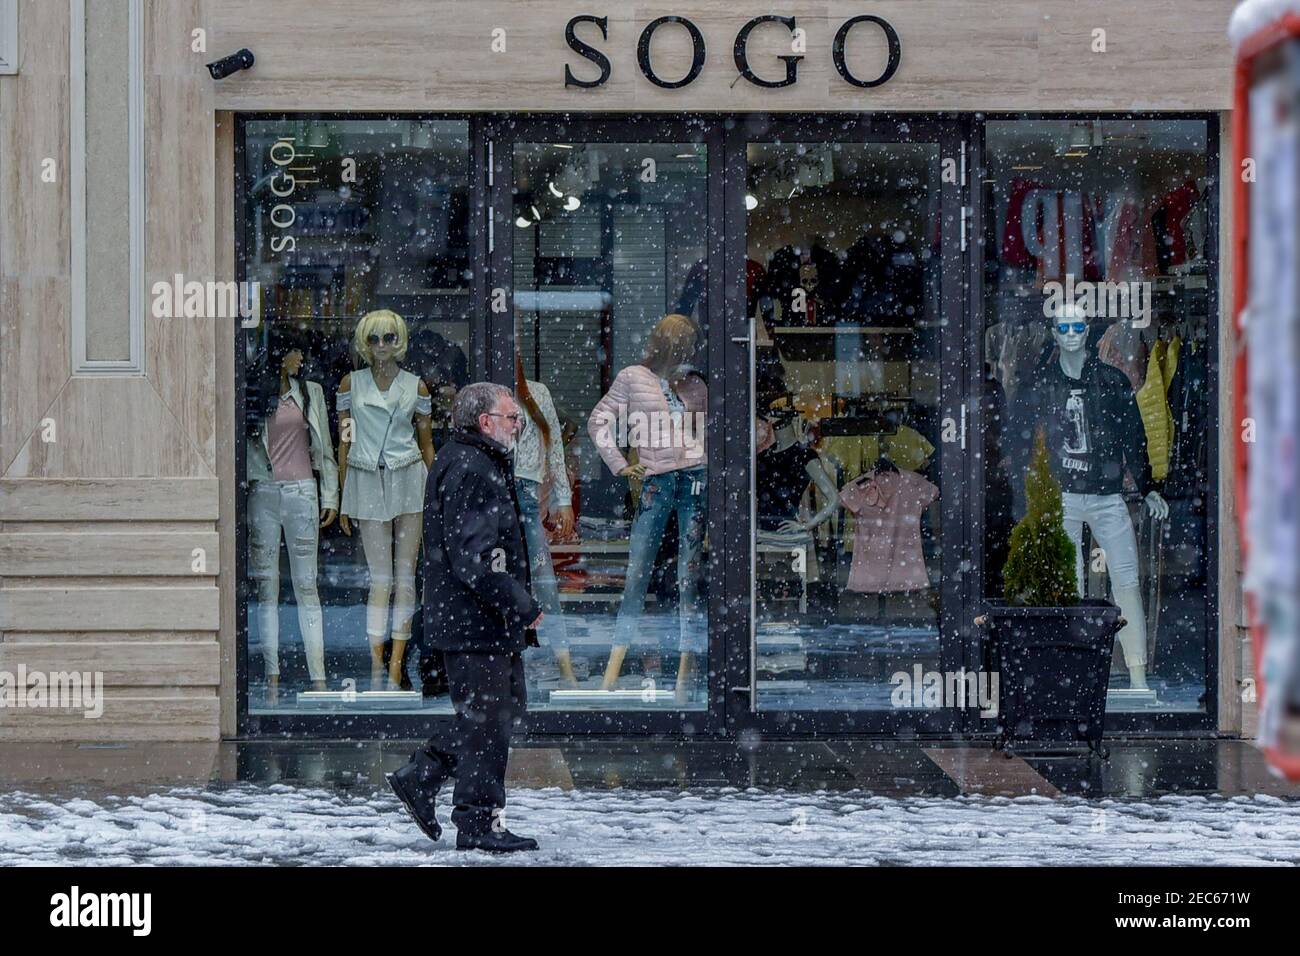 Sliven, Bulgaria - March 22nd 2018: Snow falling on a shopping high street Stock Photo